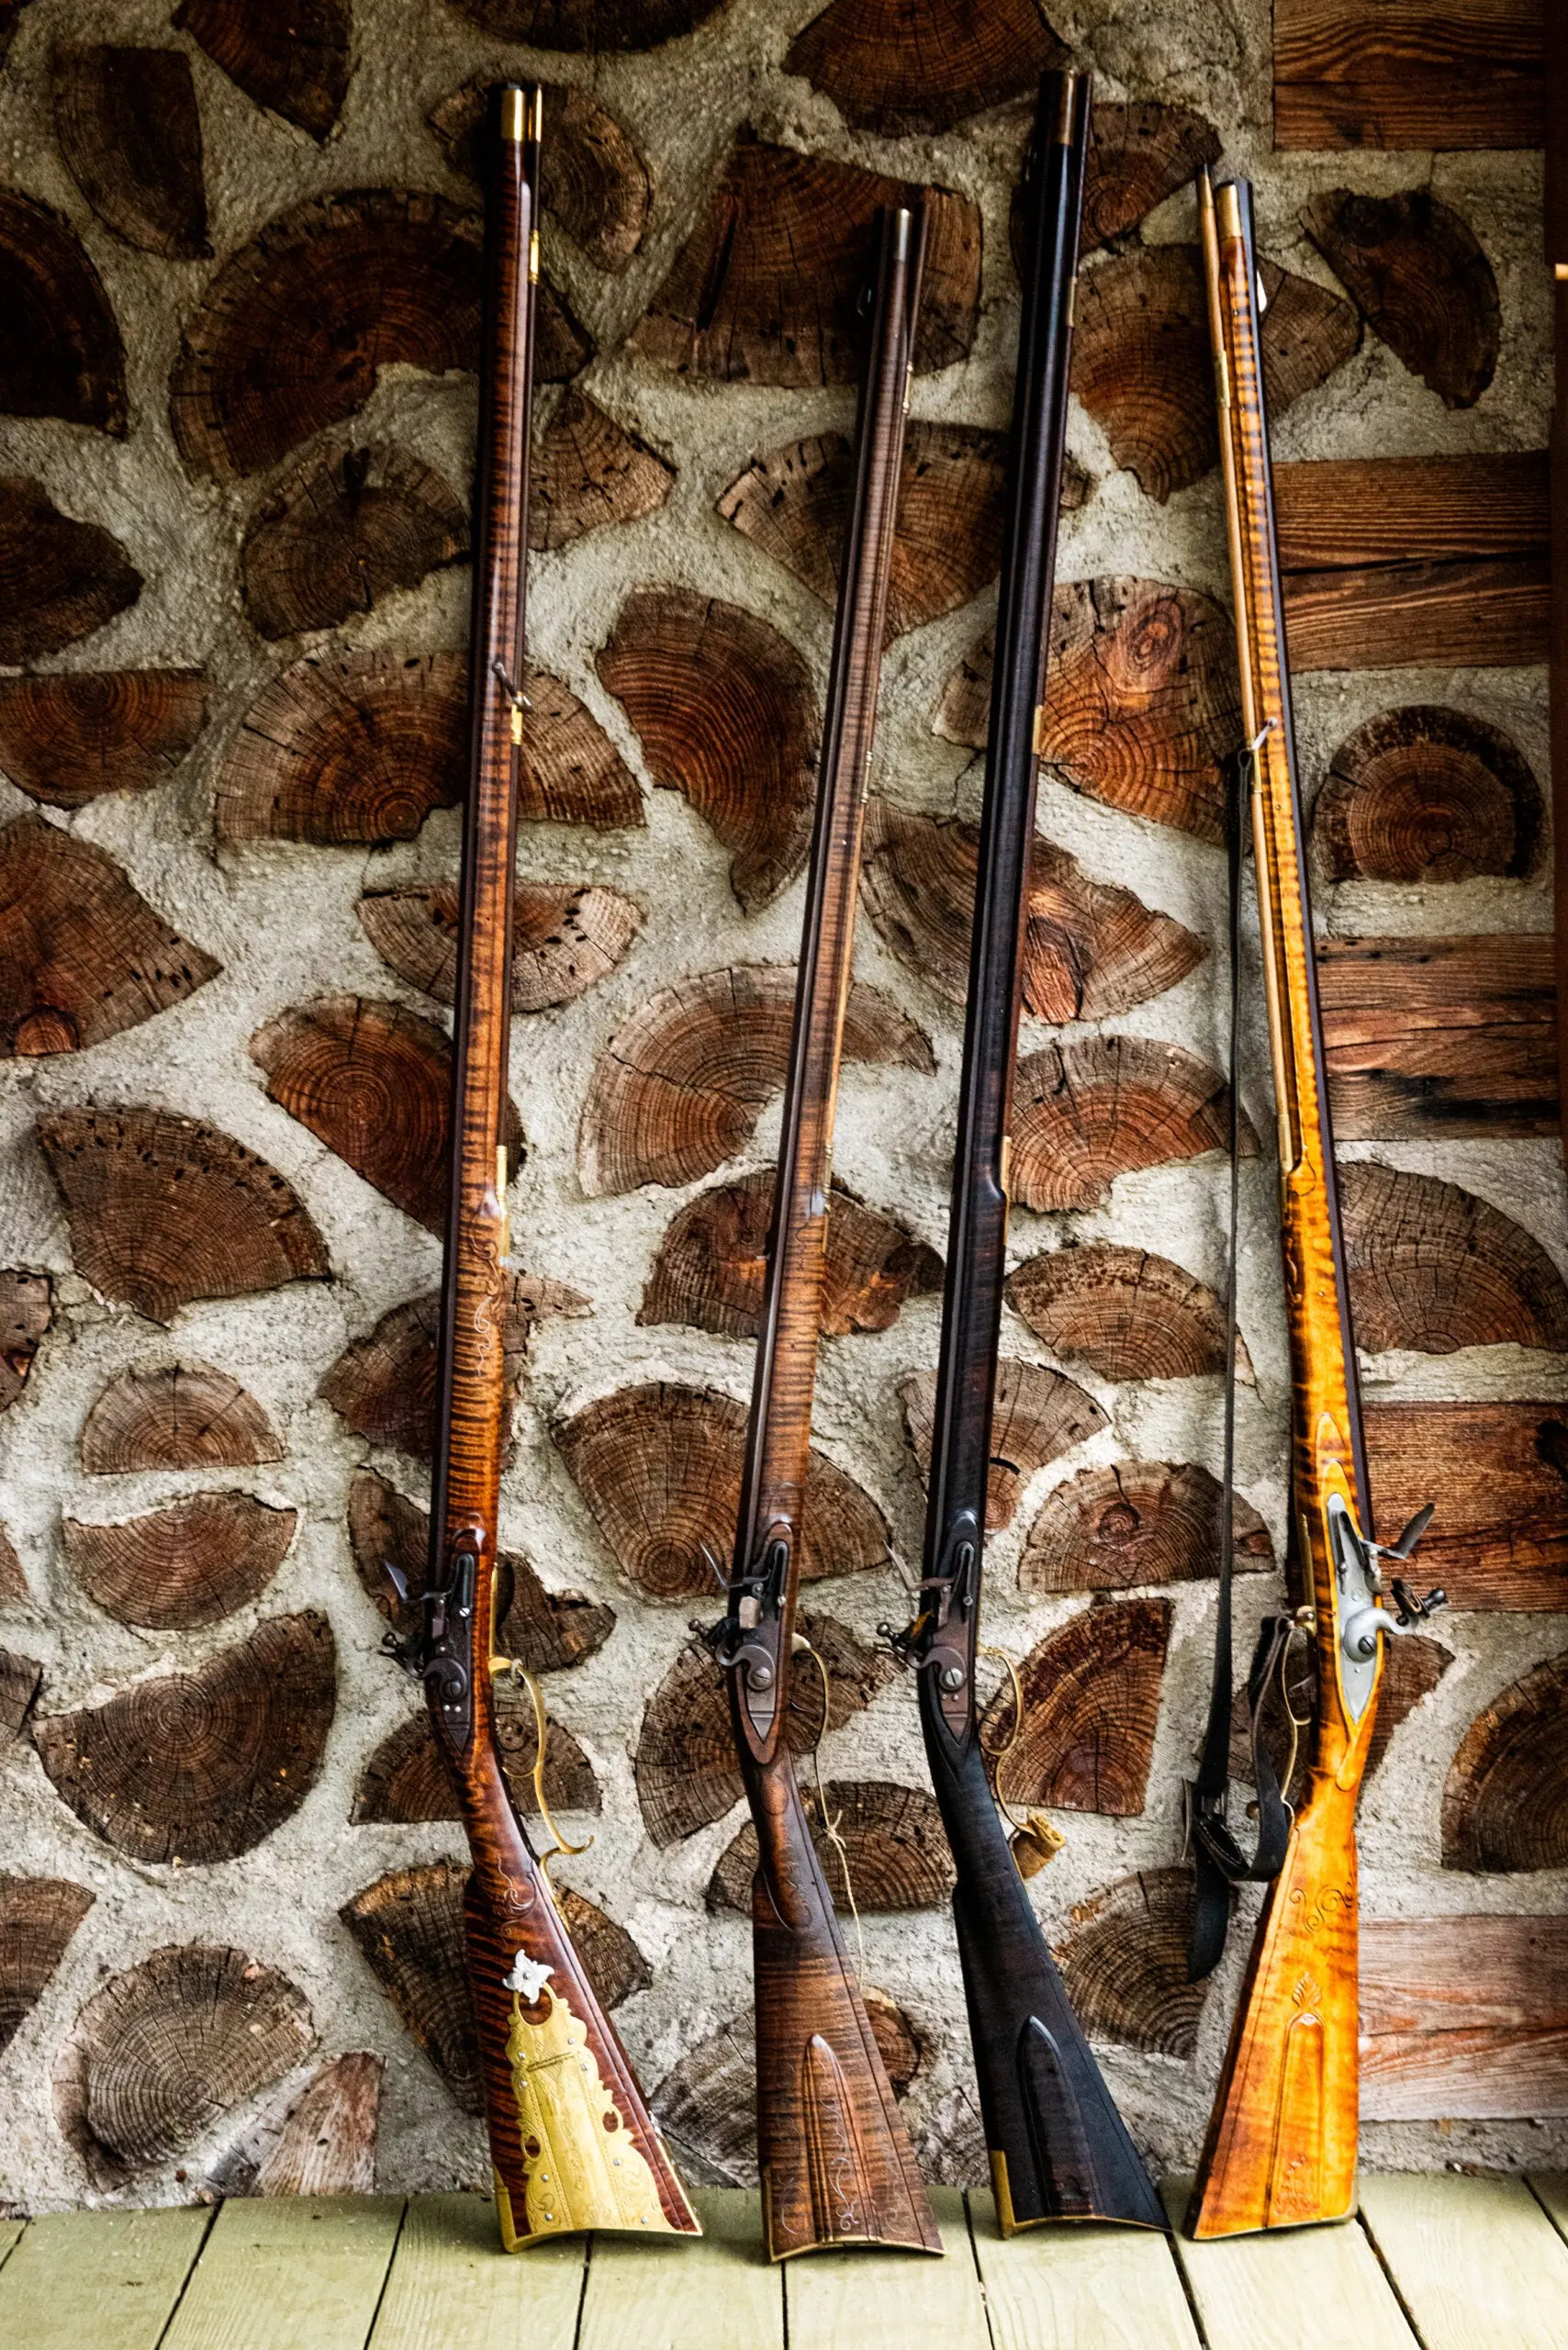 Four flintlock rifles leaning against a wall showing end cuts of wood